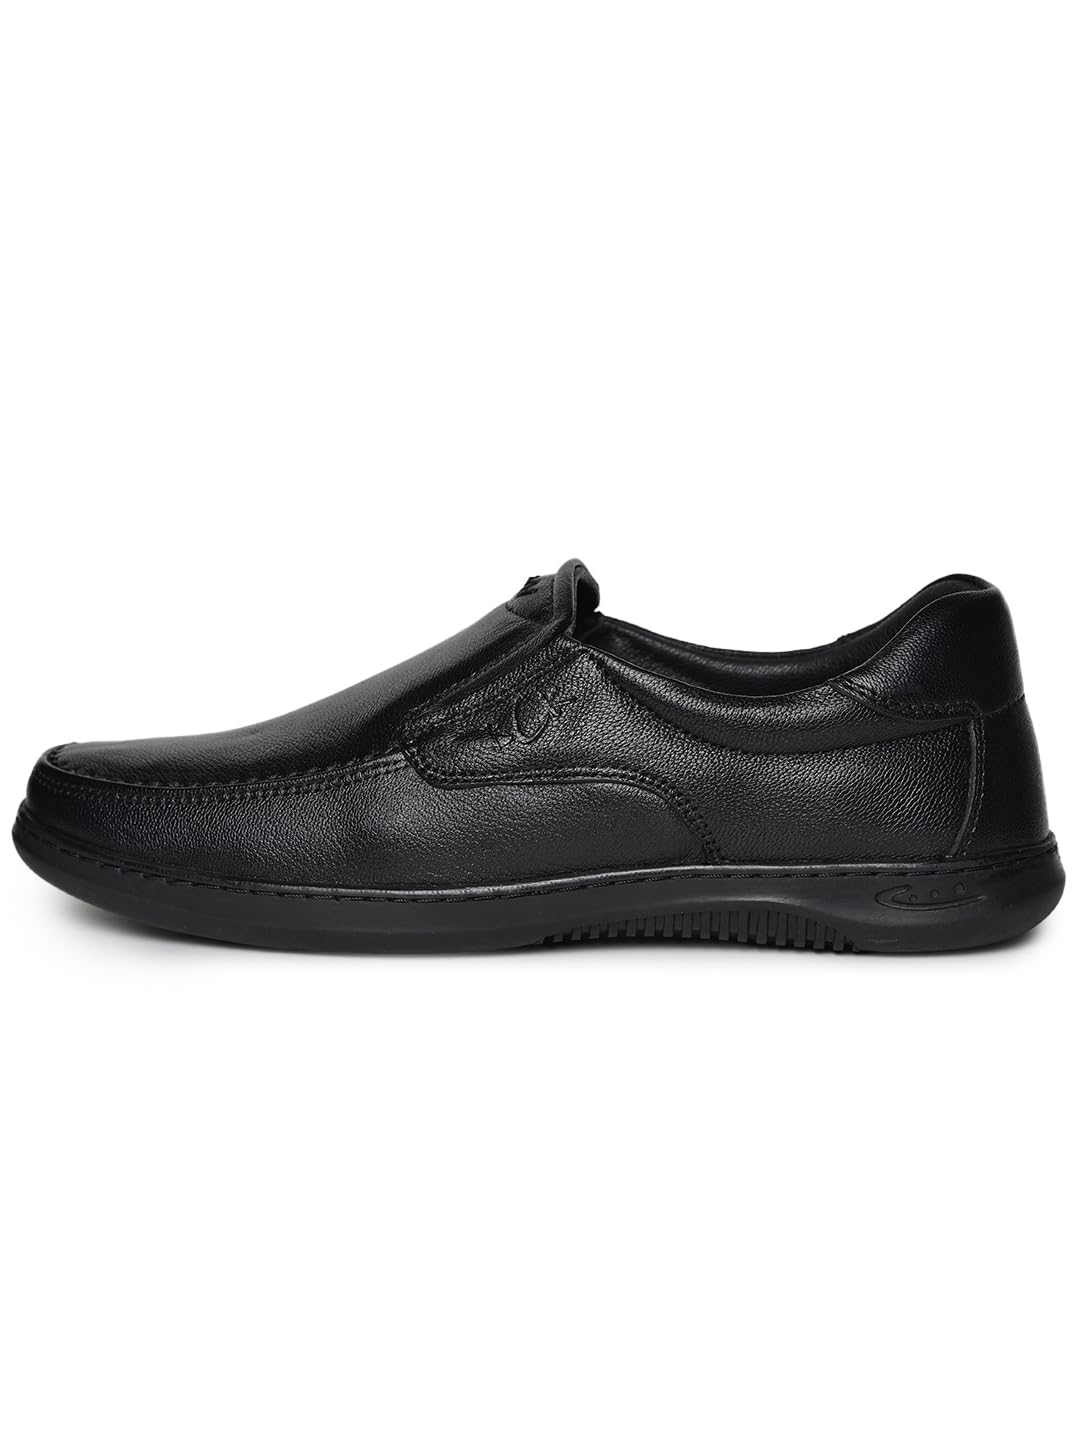 Errol Genuine Leather Casual Shoes for Mens (Black, 41) 